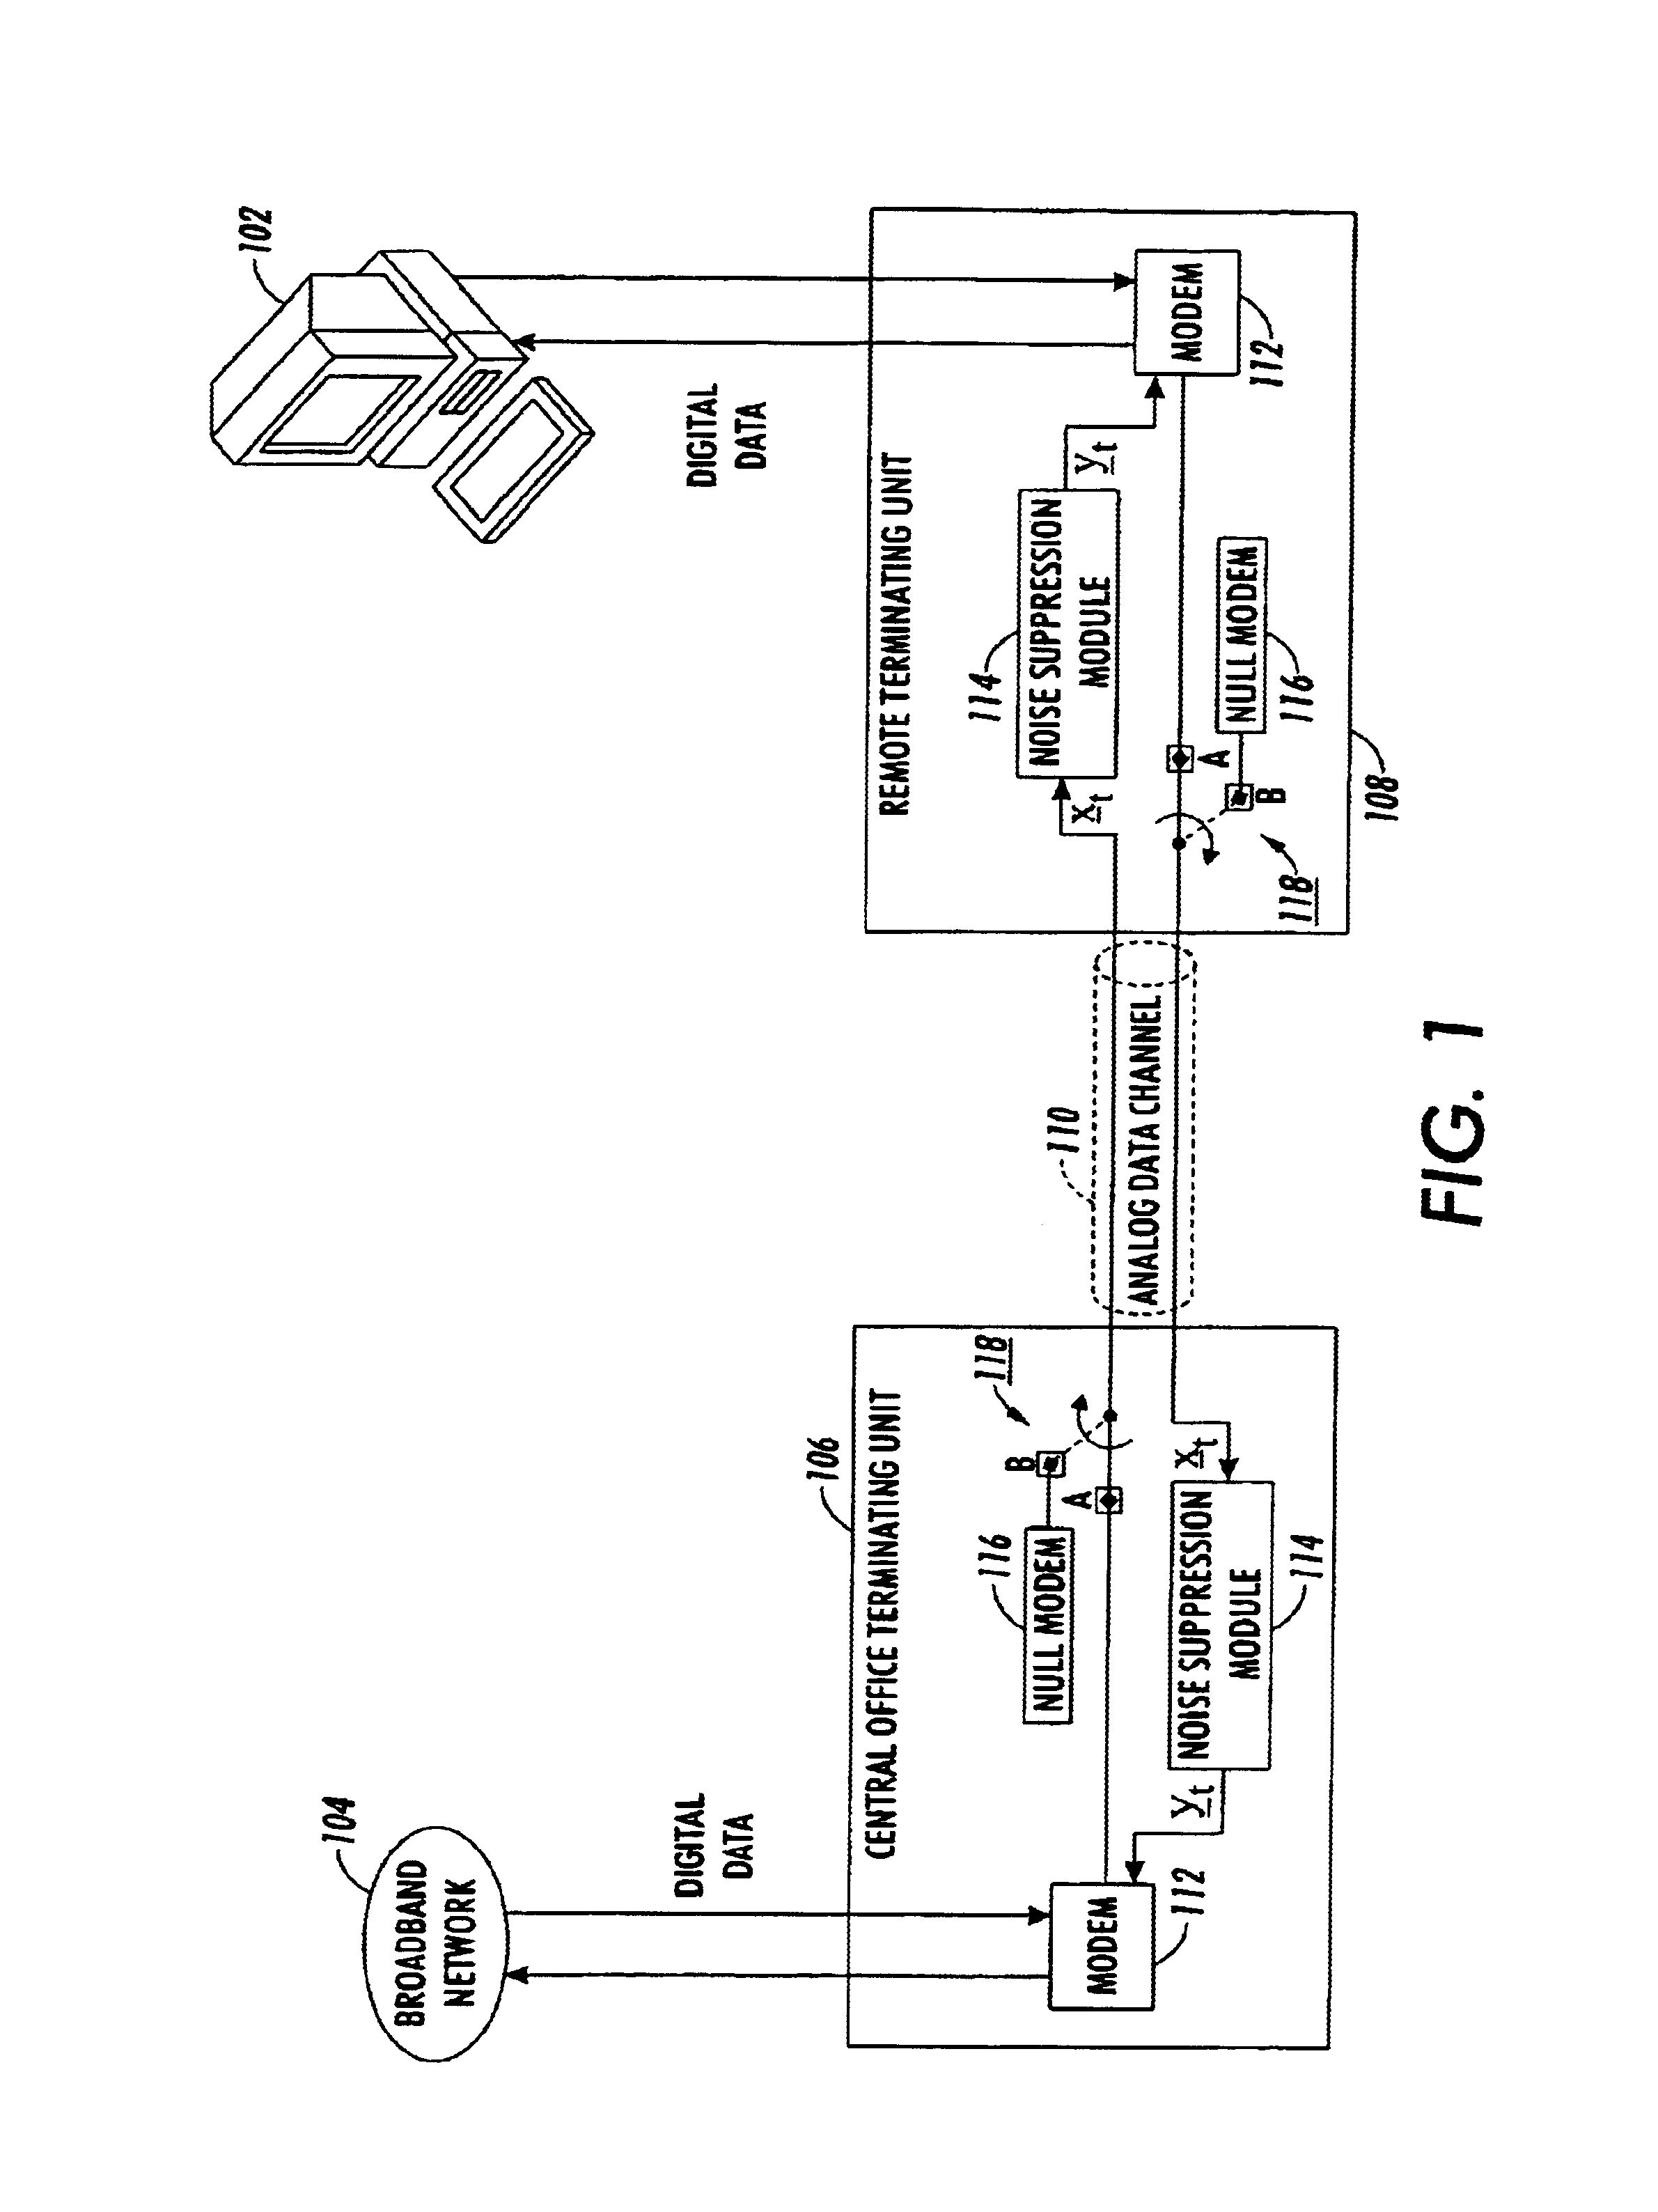 Method and apparatus for reducing impulse noise in a signal processing system